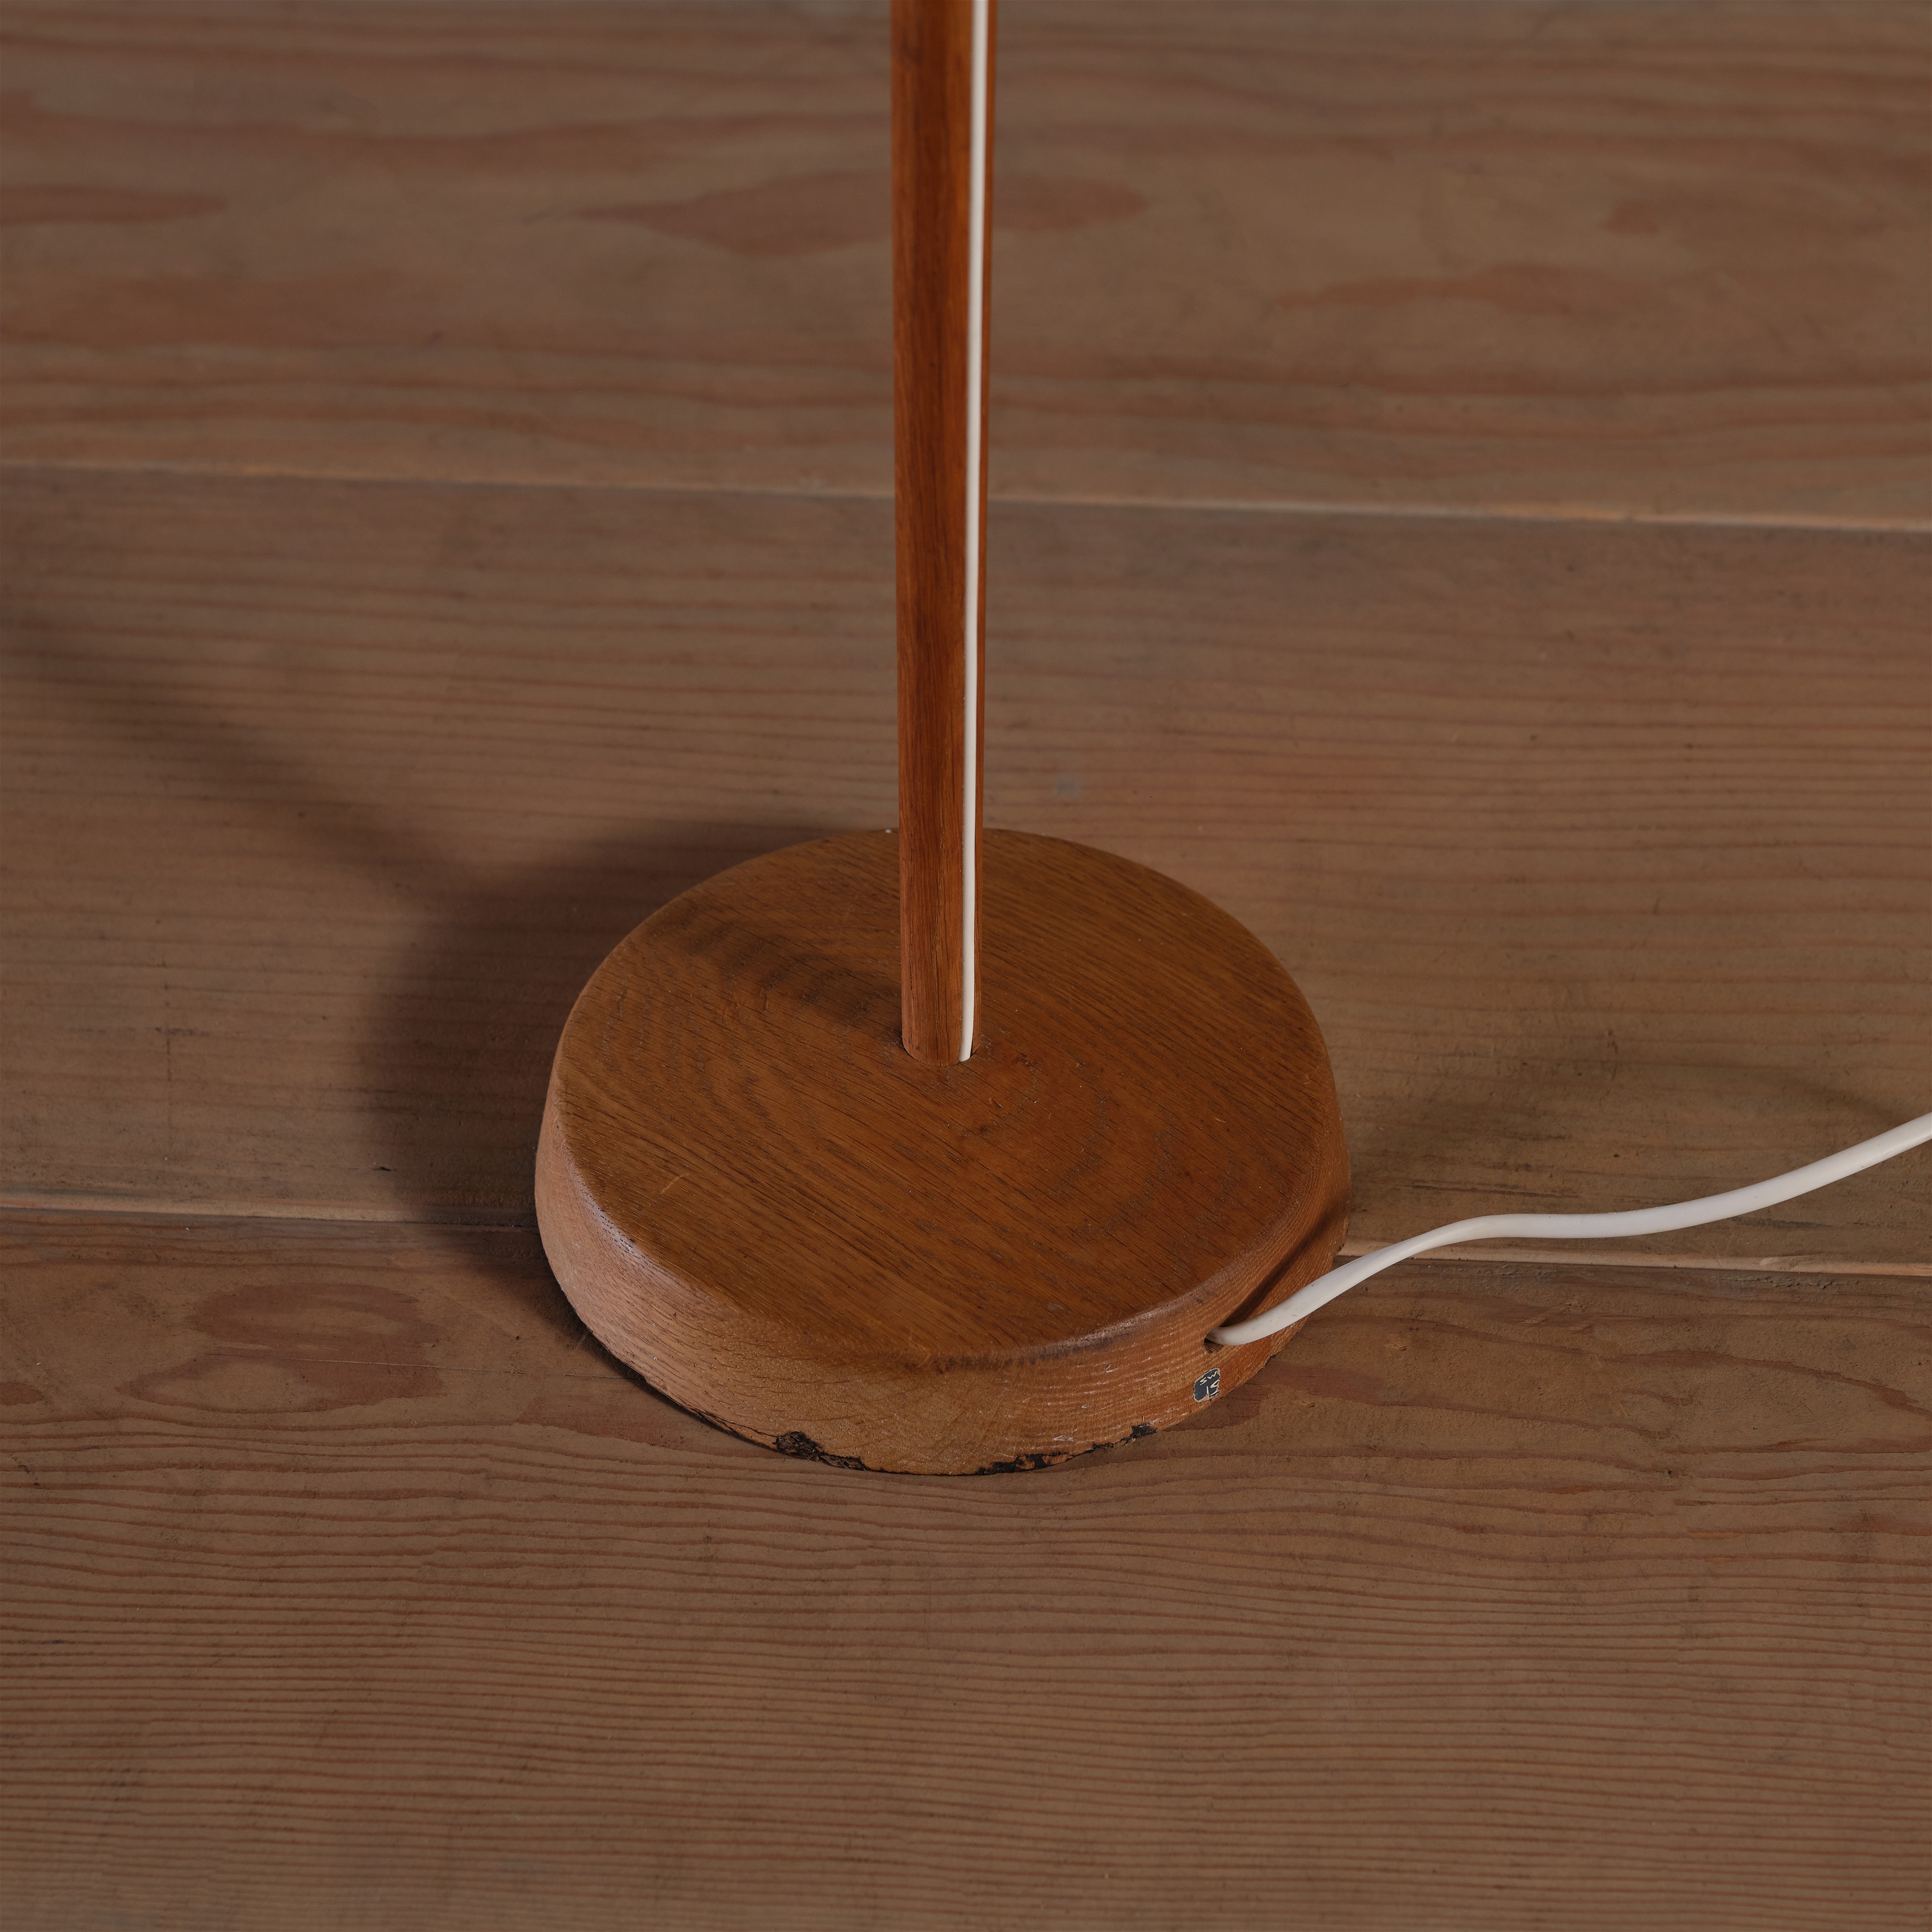 a wooden table lamp on a wooden floor